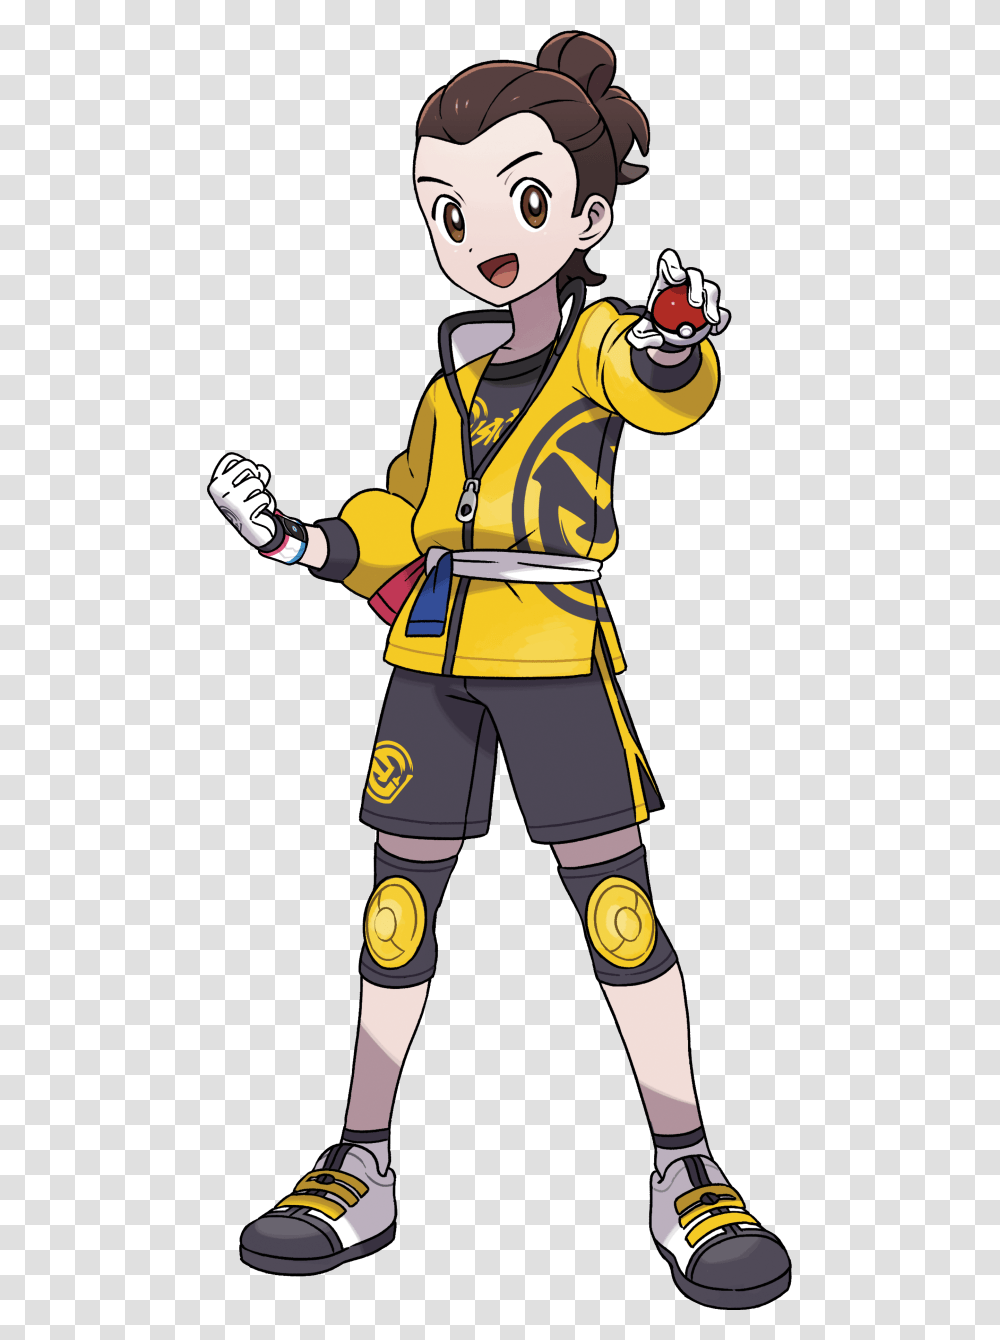 Pokemon Sword And Shield Expansion Outfits, Person, Human, Fireman, Costume Transparent Png